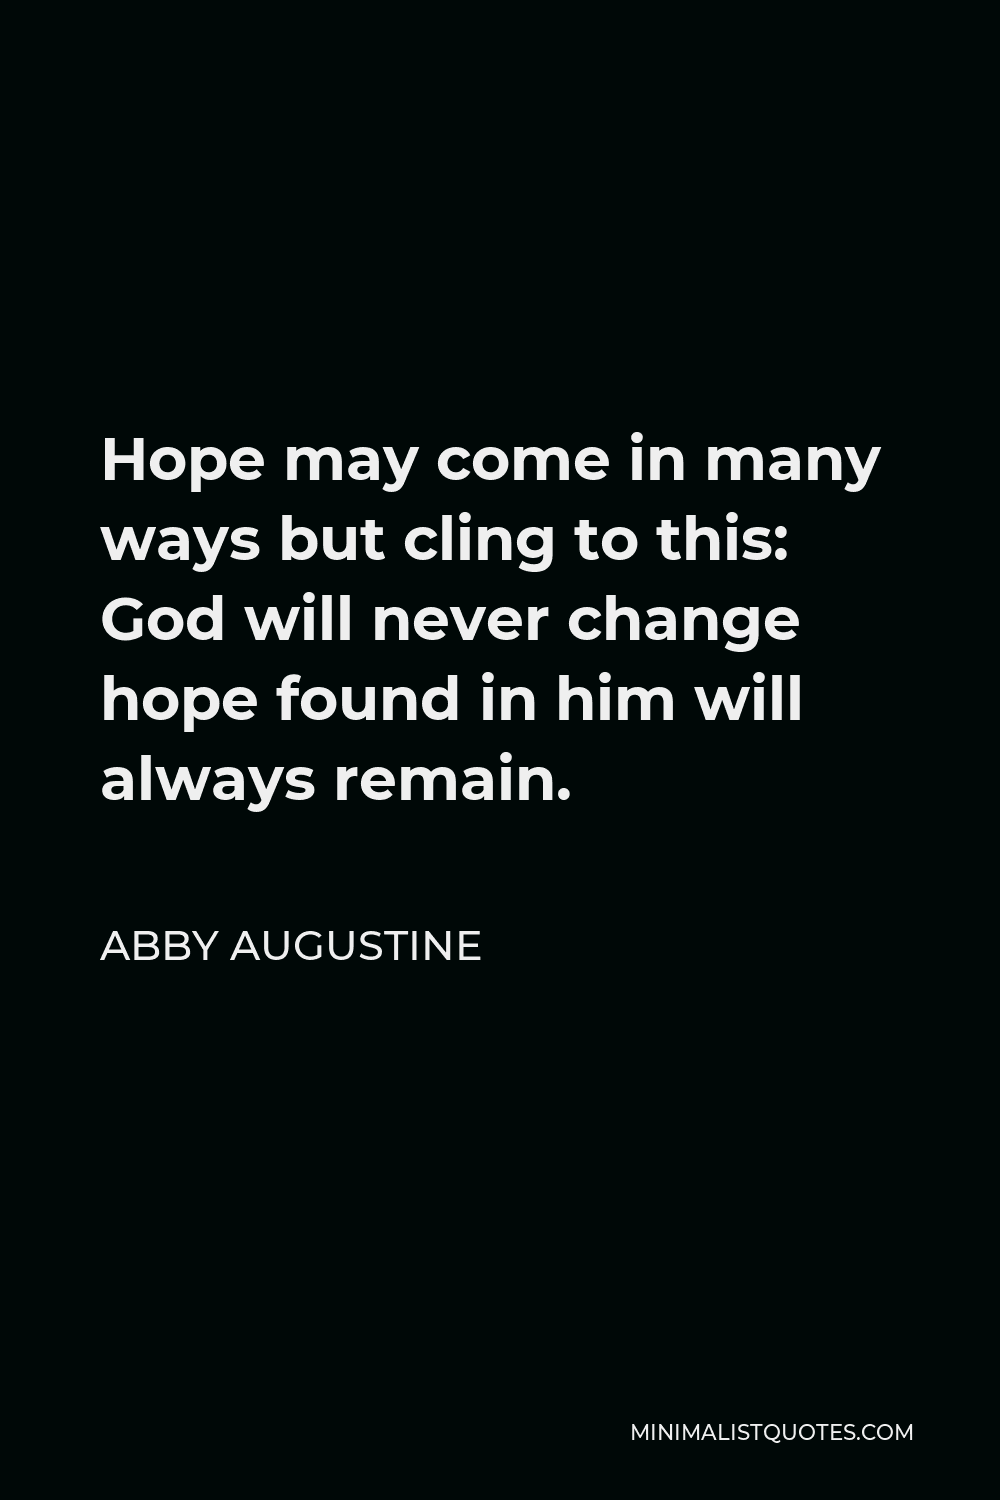 Abby Augustine Quote - Hope may come in many ways but cling to this: God will never change hope found in him will always remain.